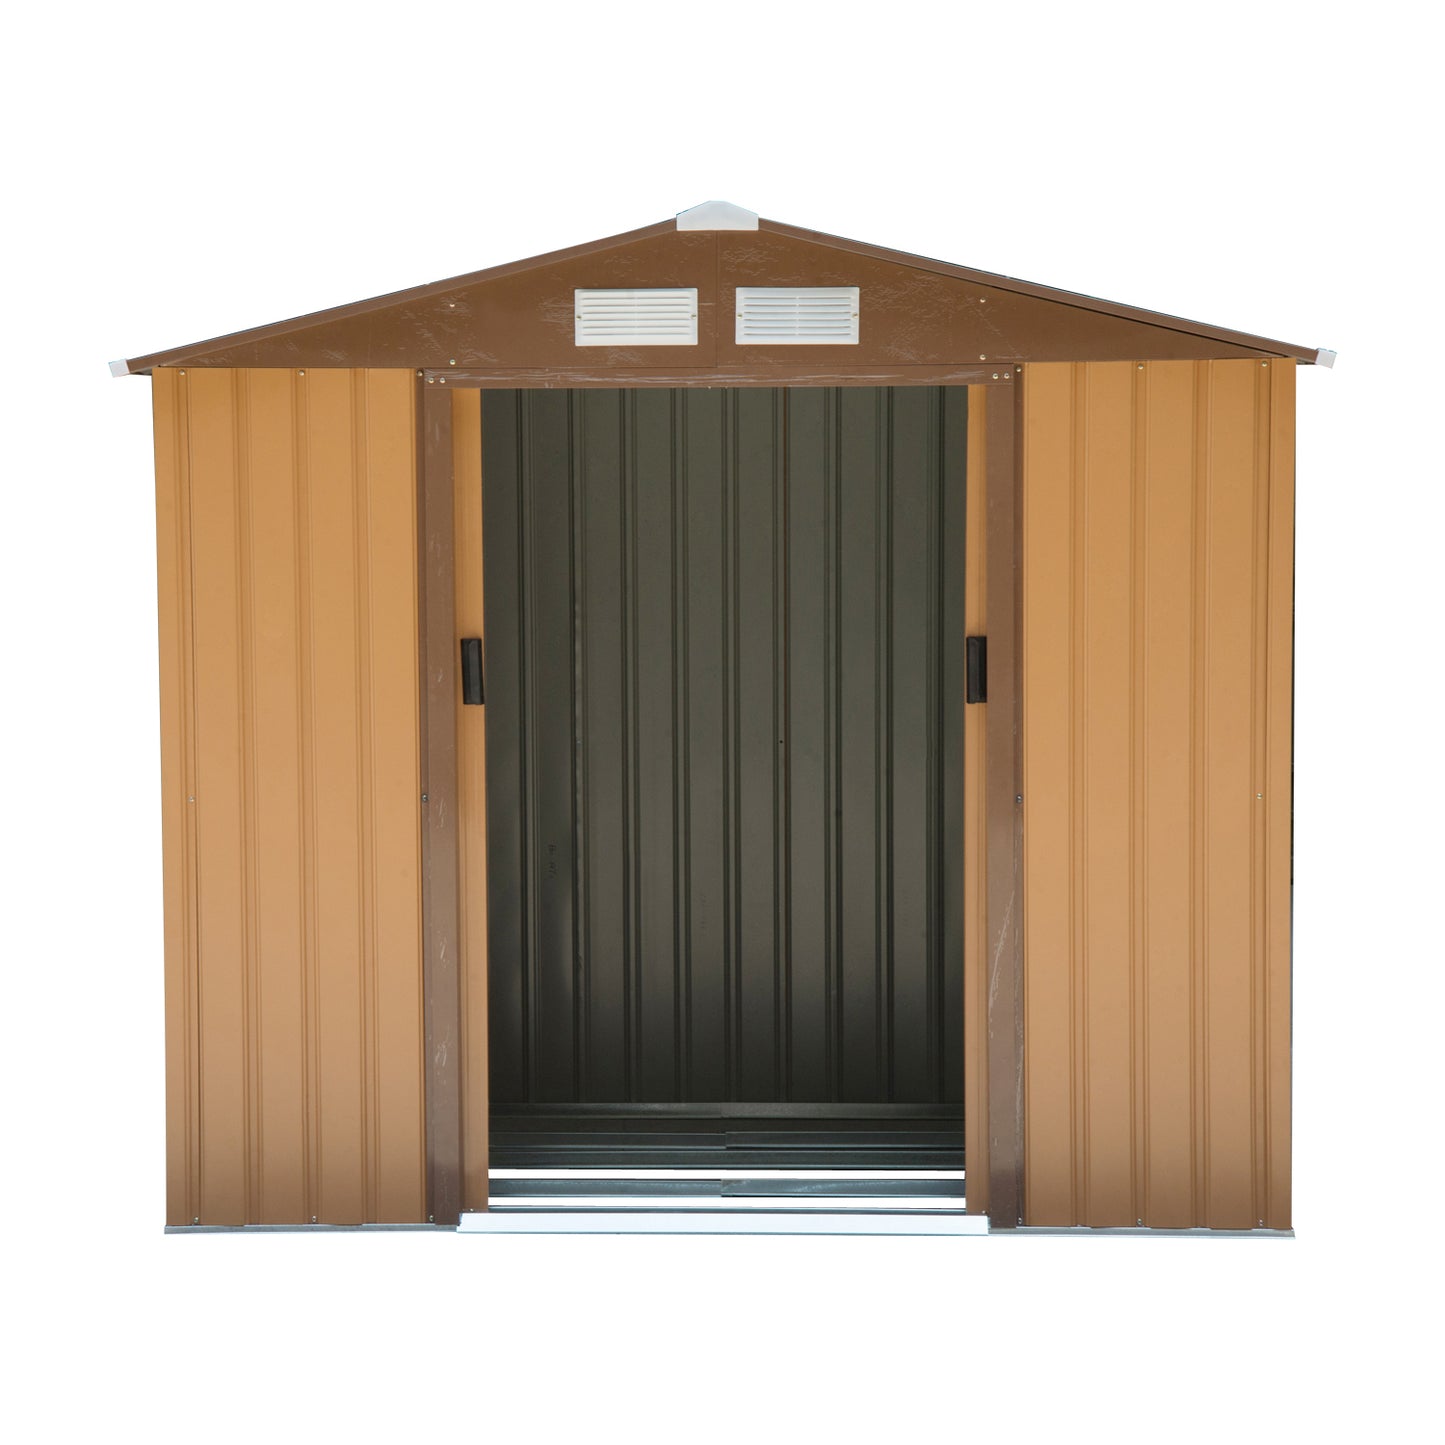 Outsunny 7 x 4ft Lockable Garden Shed Large Patio Roofed Tool Metal Storage Building Foundation Sheds - Khaki